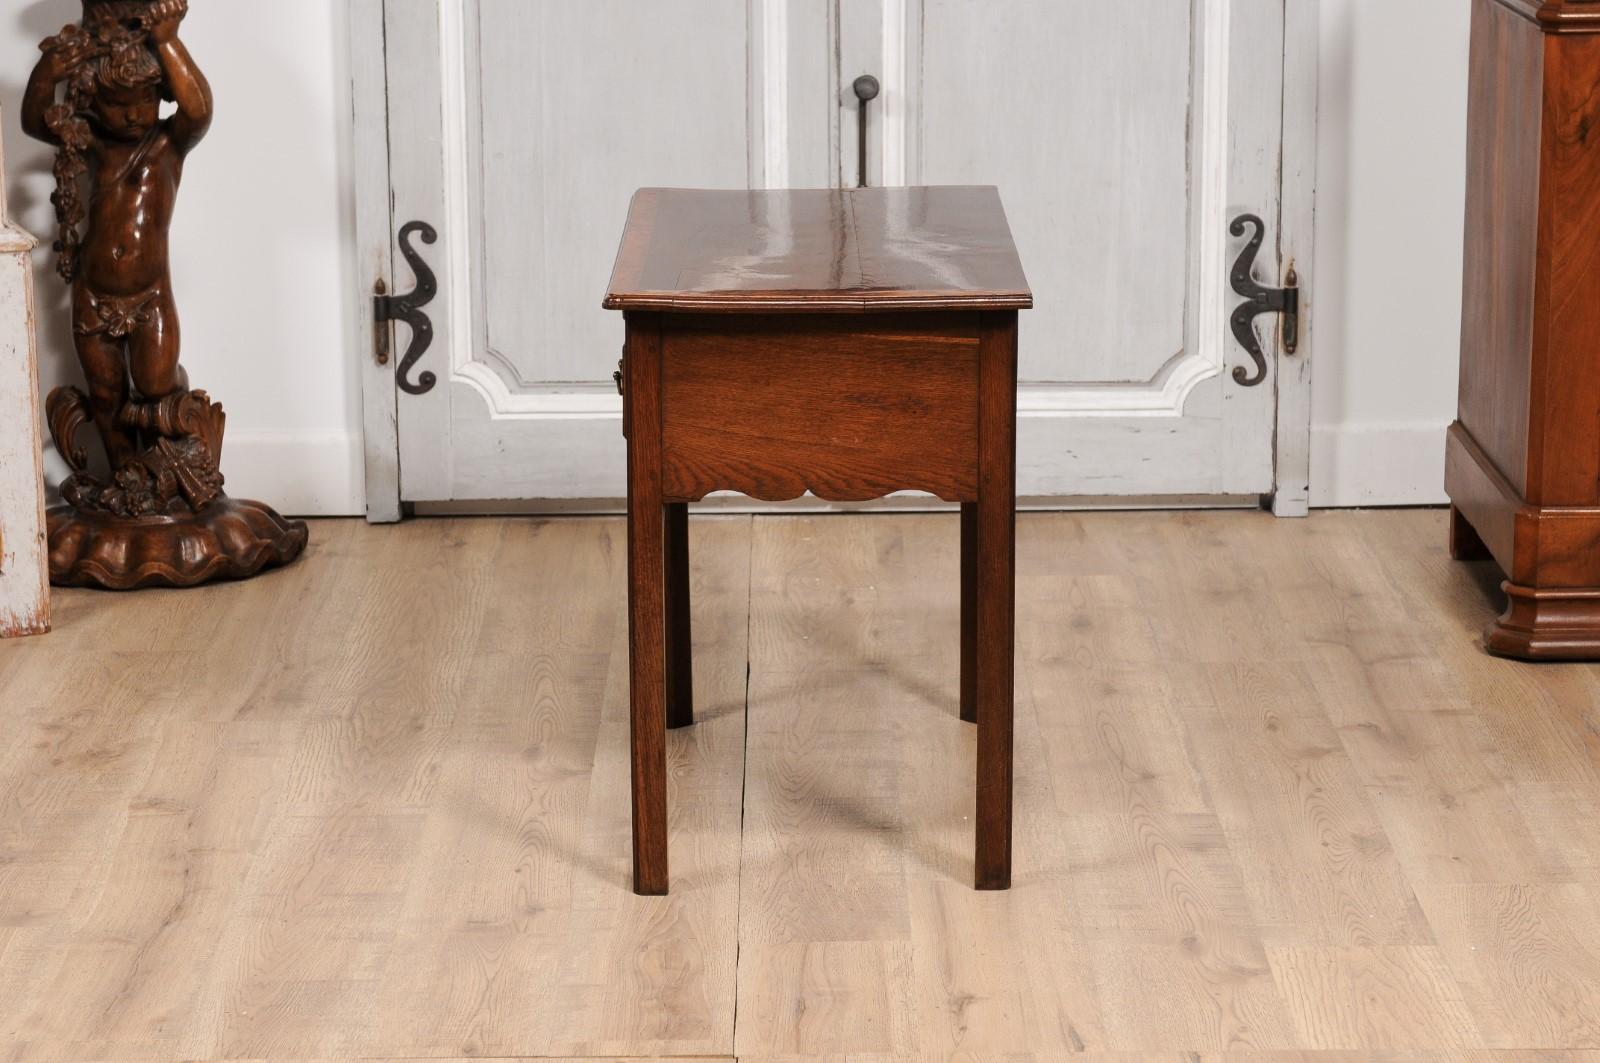 English Georgian Period 18th Century Oak Lowboy Side Table with Carved Apron For Sale 8